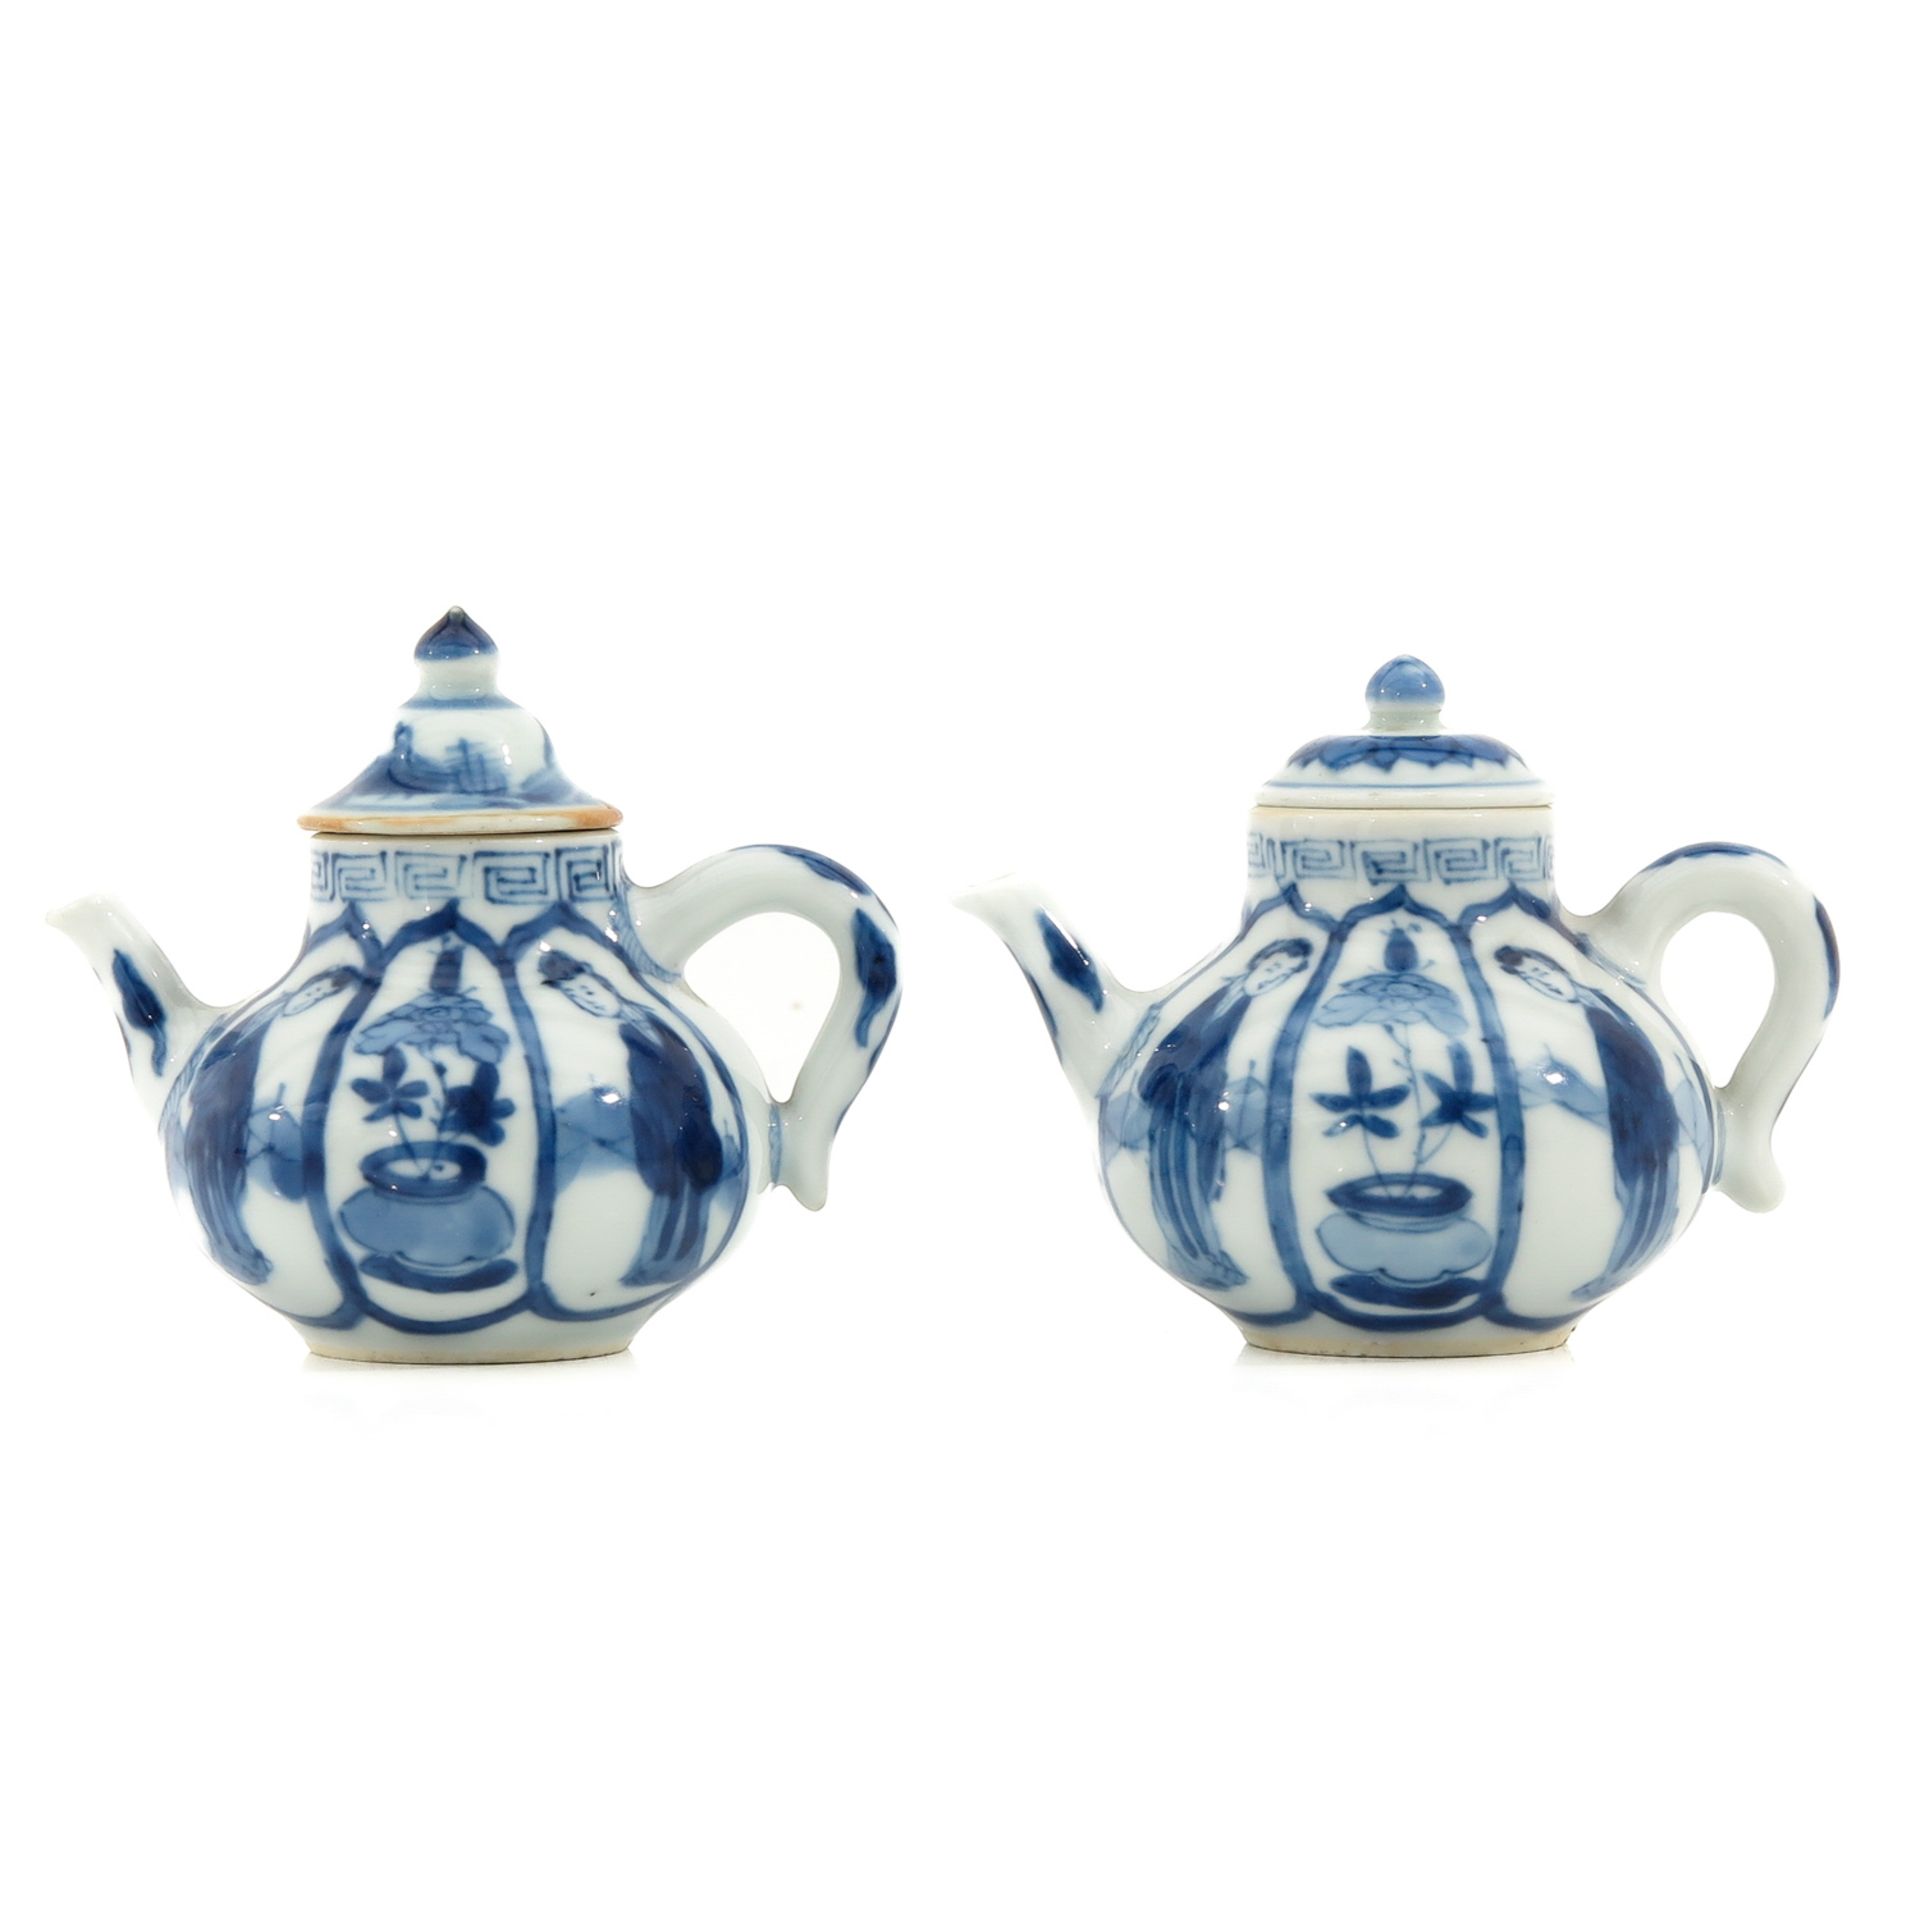 A Lot of 2 Small Blue and White Teapots